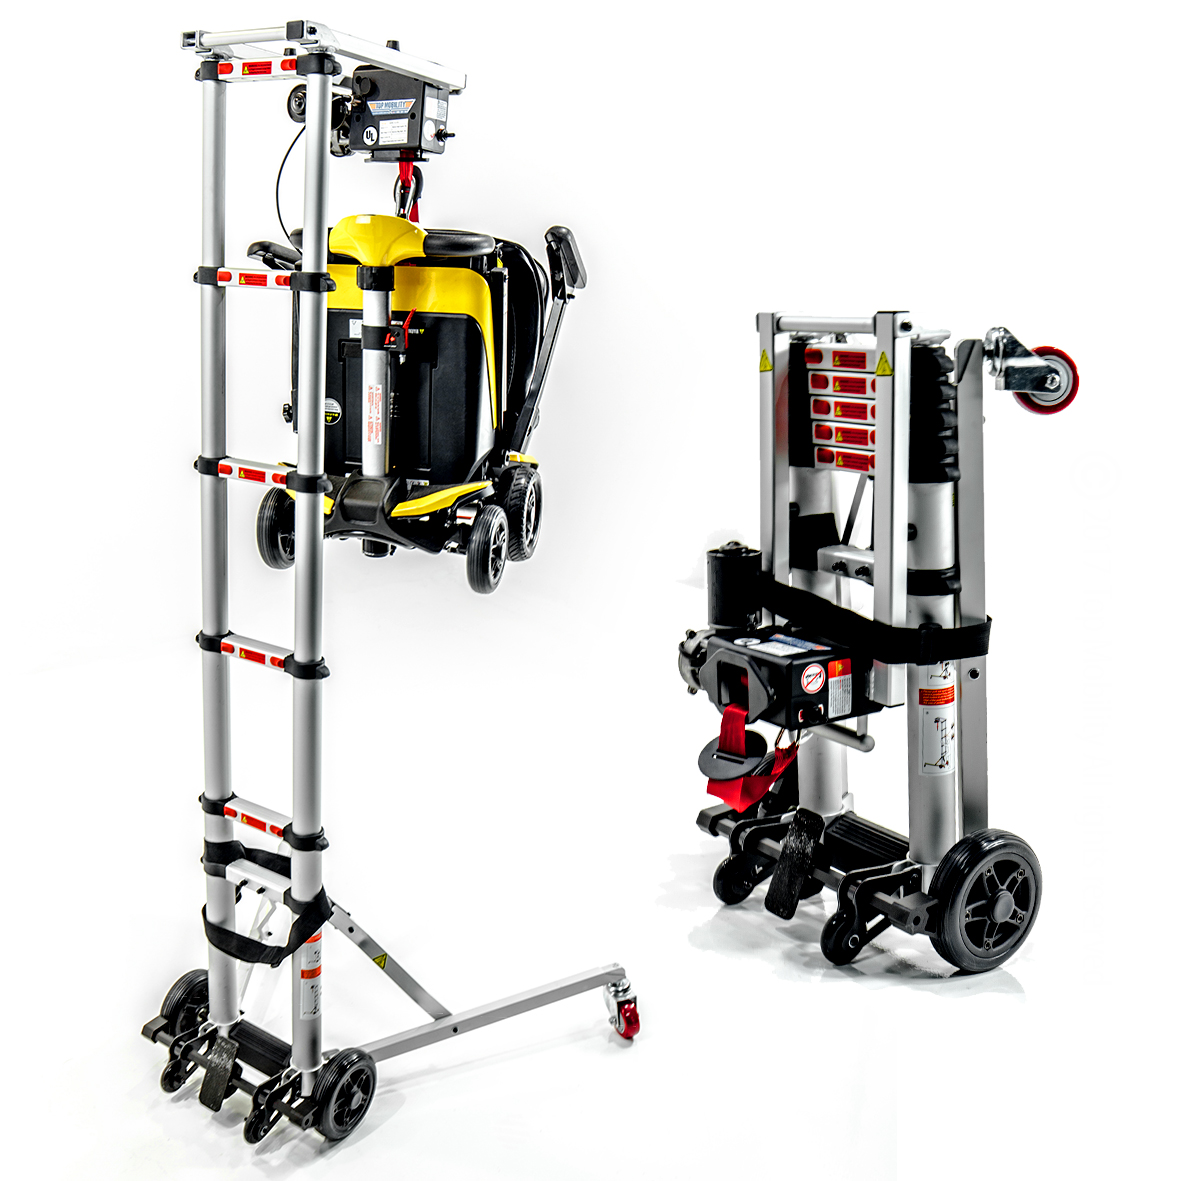 Hercules Portable Automated Lift 